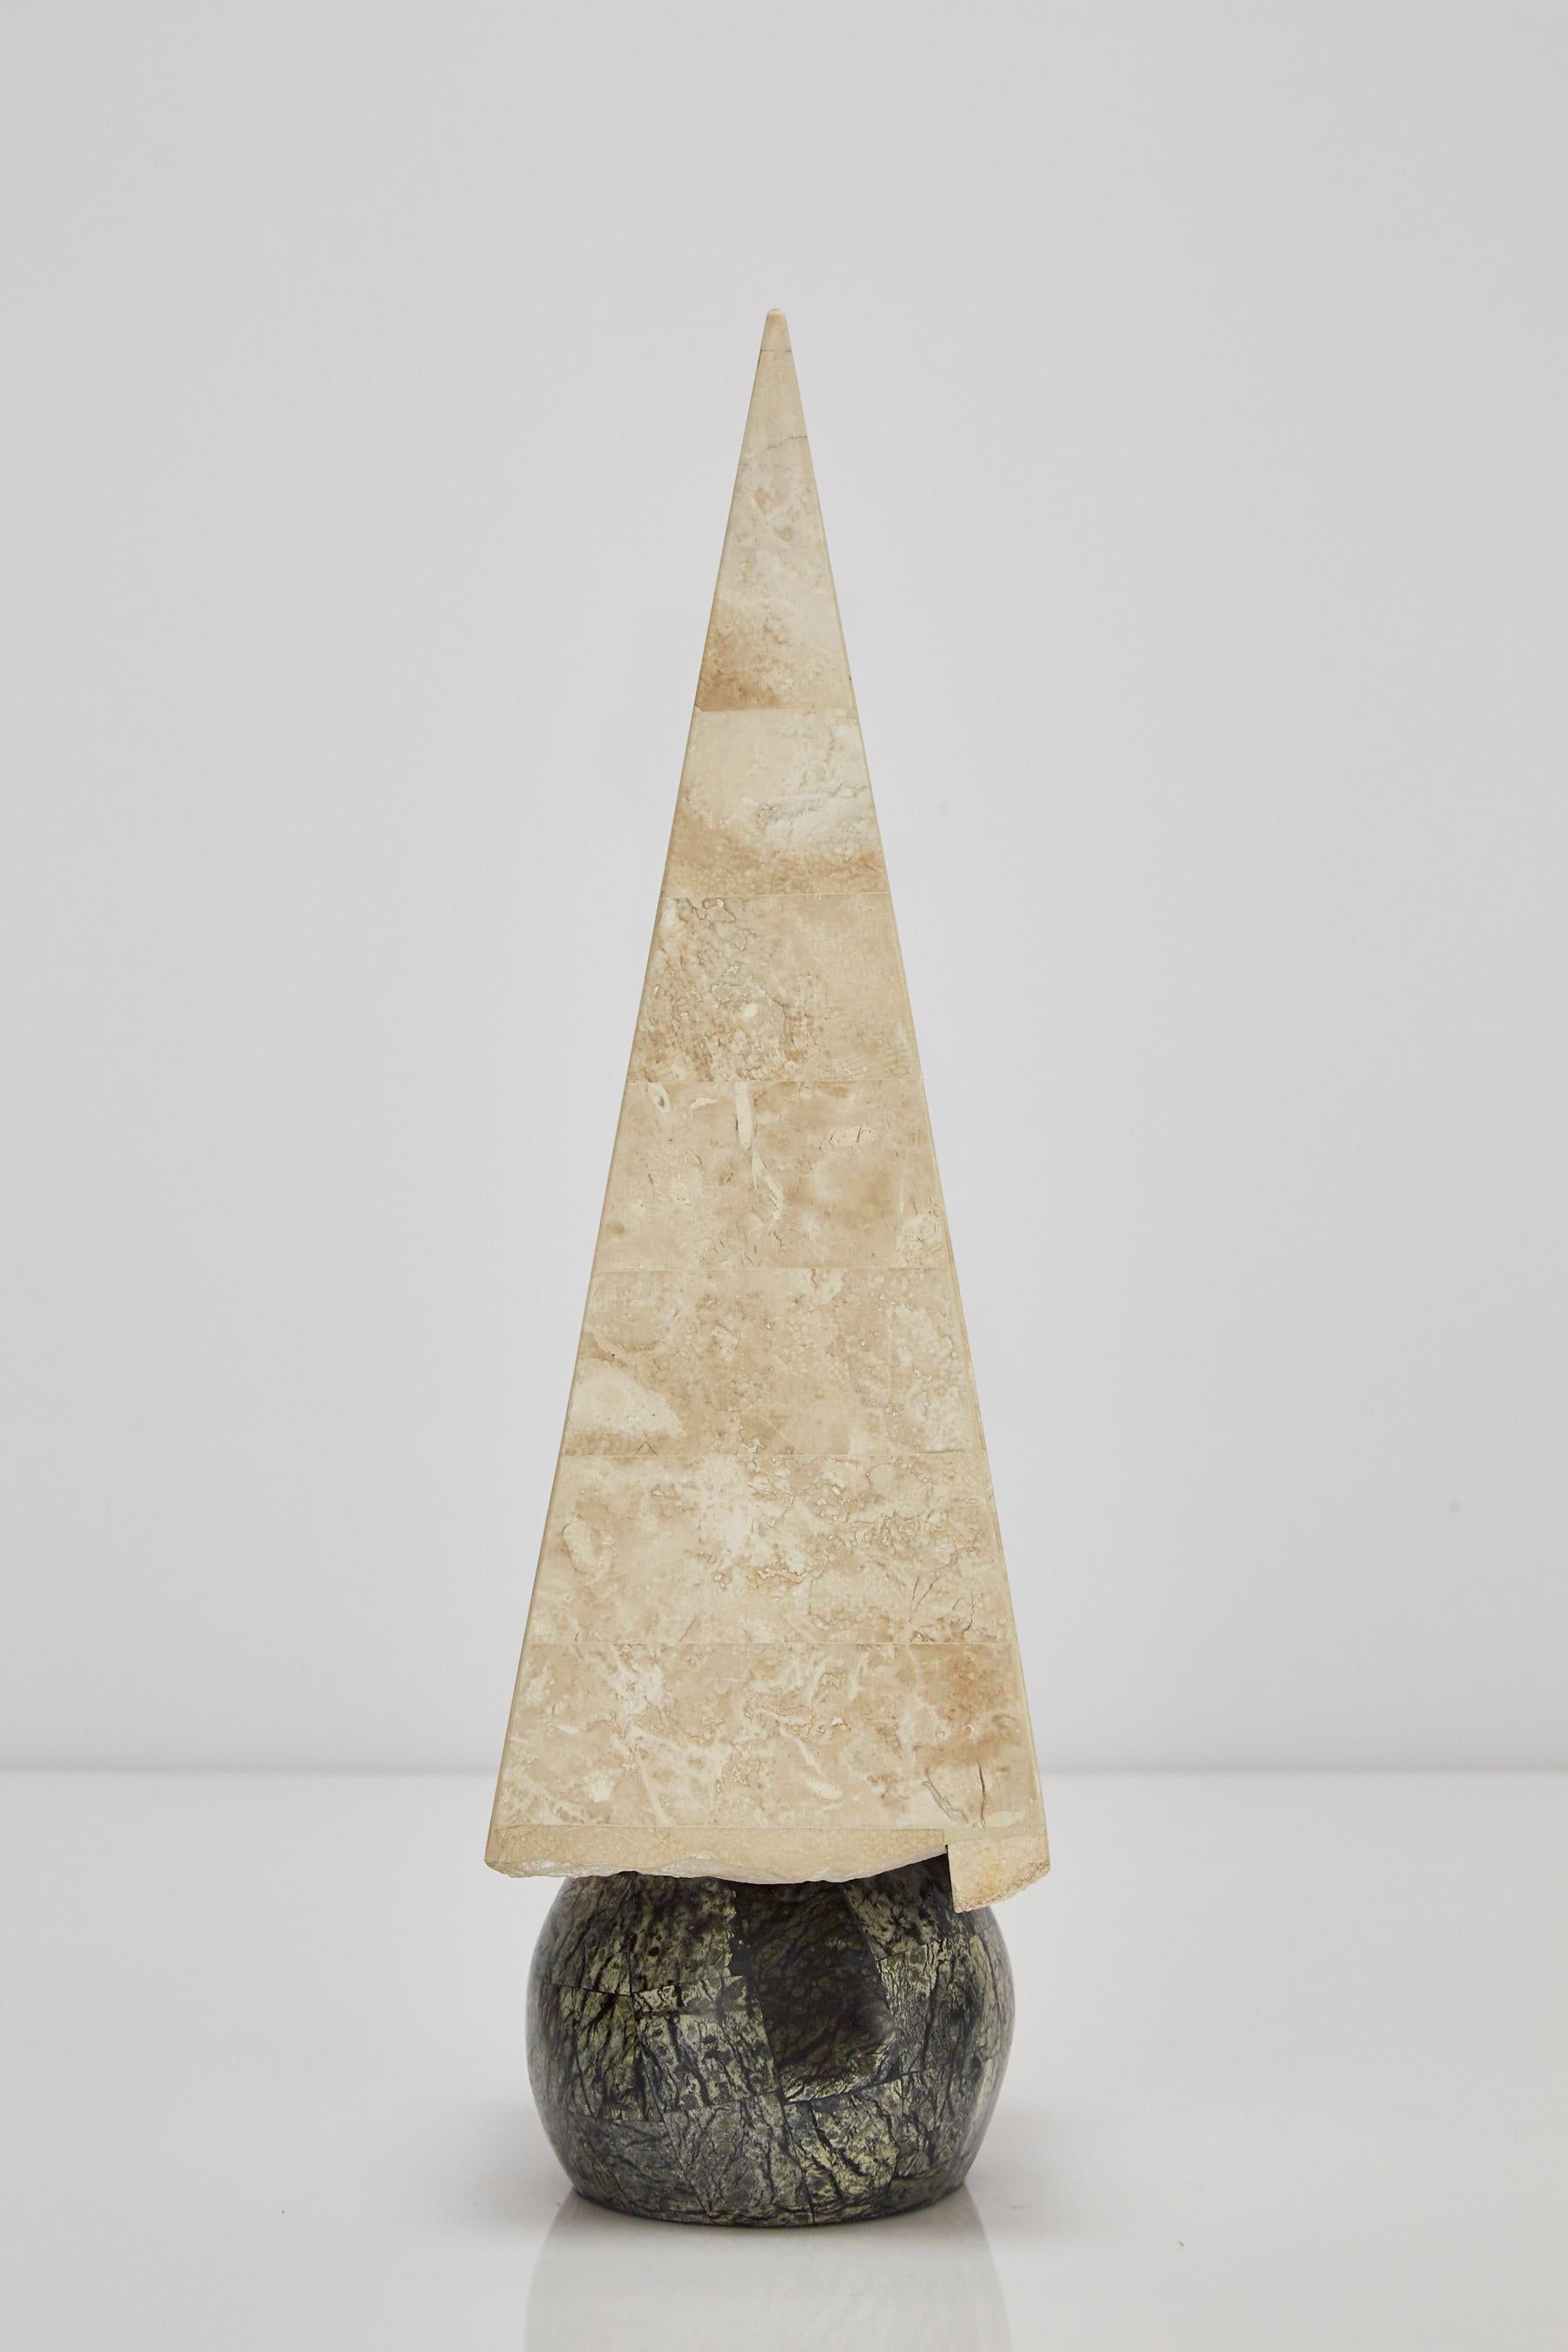 20 in. tall decorative obelisk. The pyramid executed in tessellated beige fossil stone and round base executed in Serpentine stone. 

Coordinates with items LU1484211449881 and LU1484211449861 for a set of three.

All furnishings are made from 100%